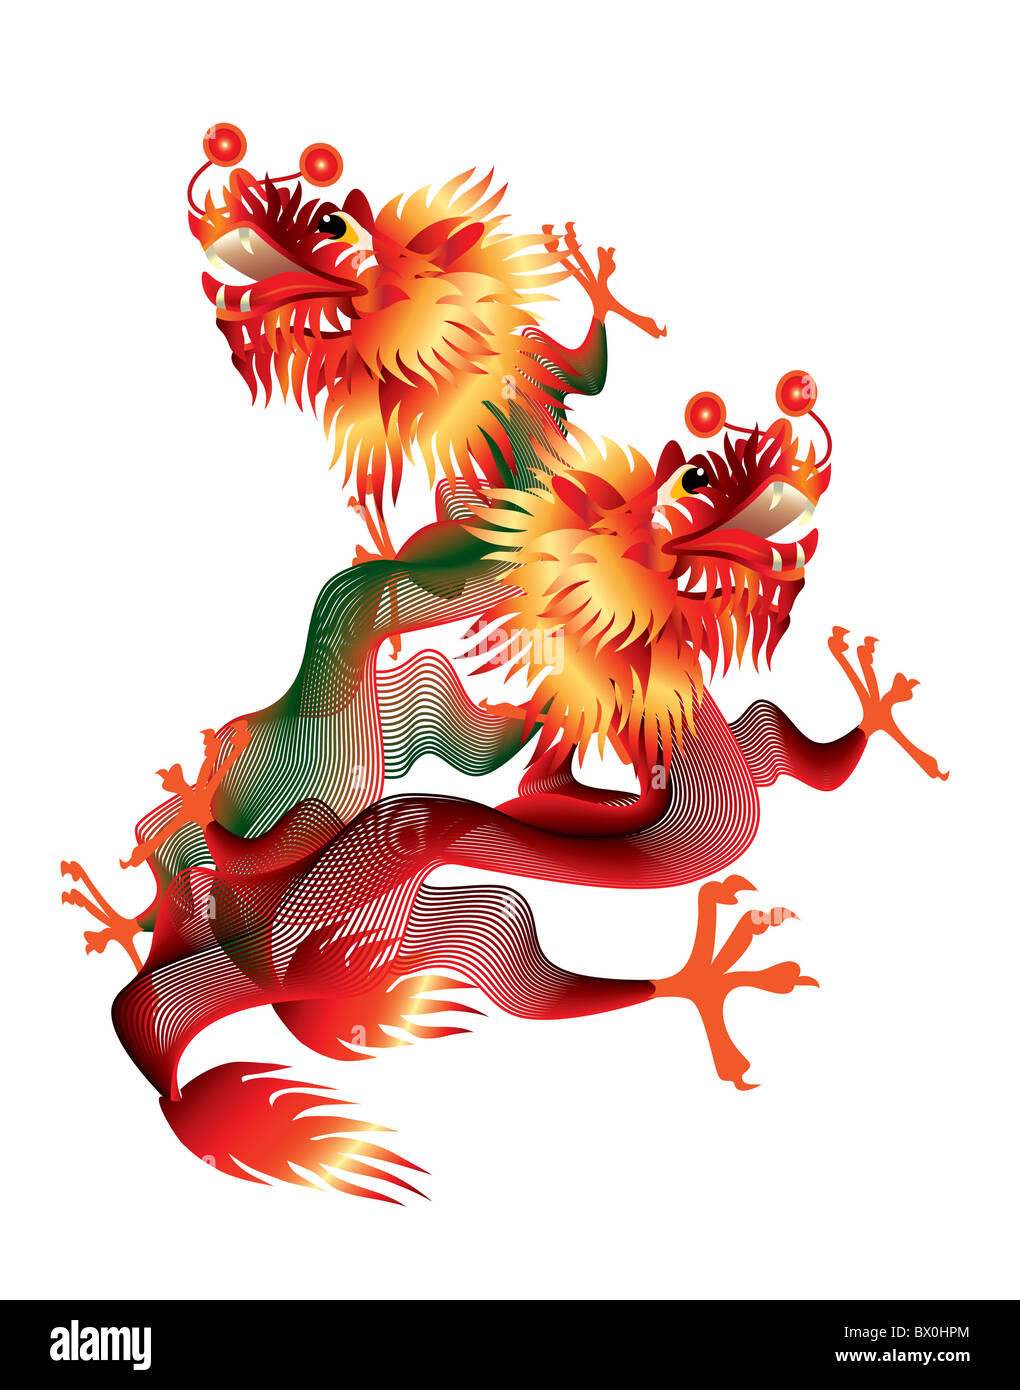 Colorful Chinese dragons on white background Stock Photo